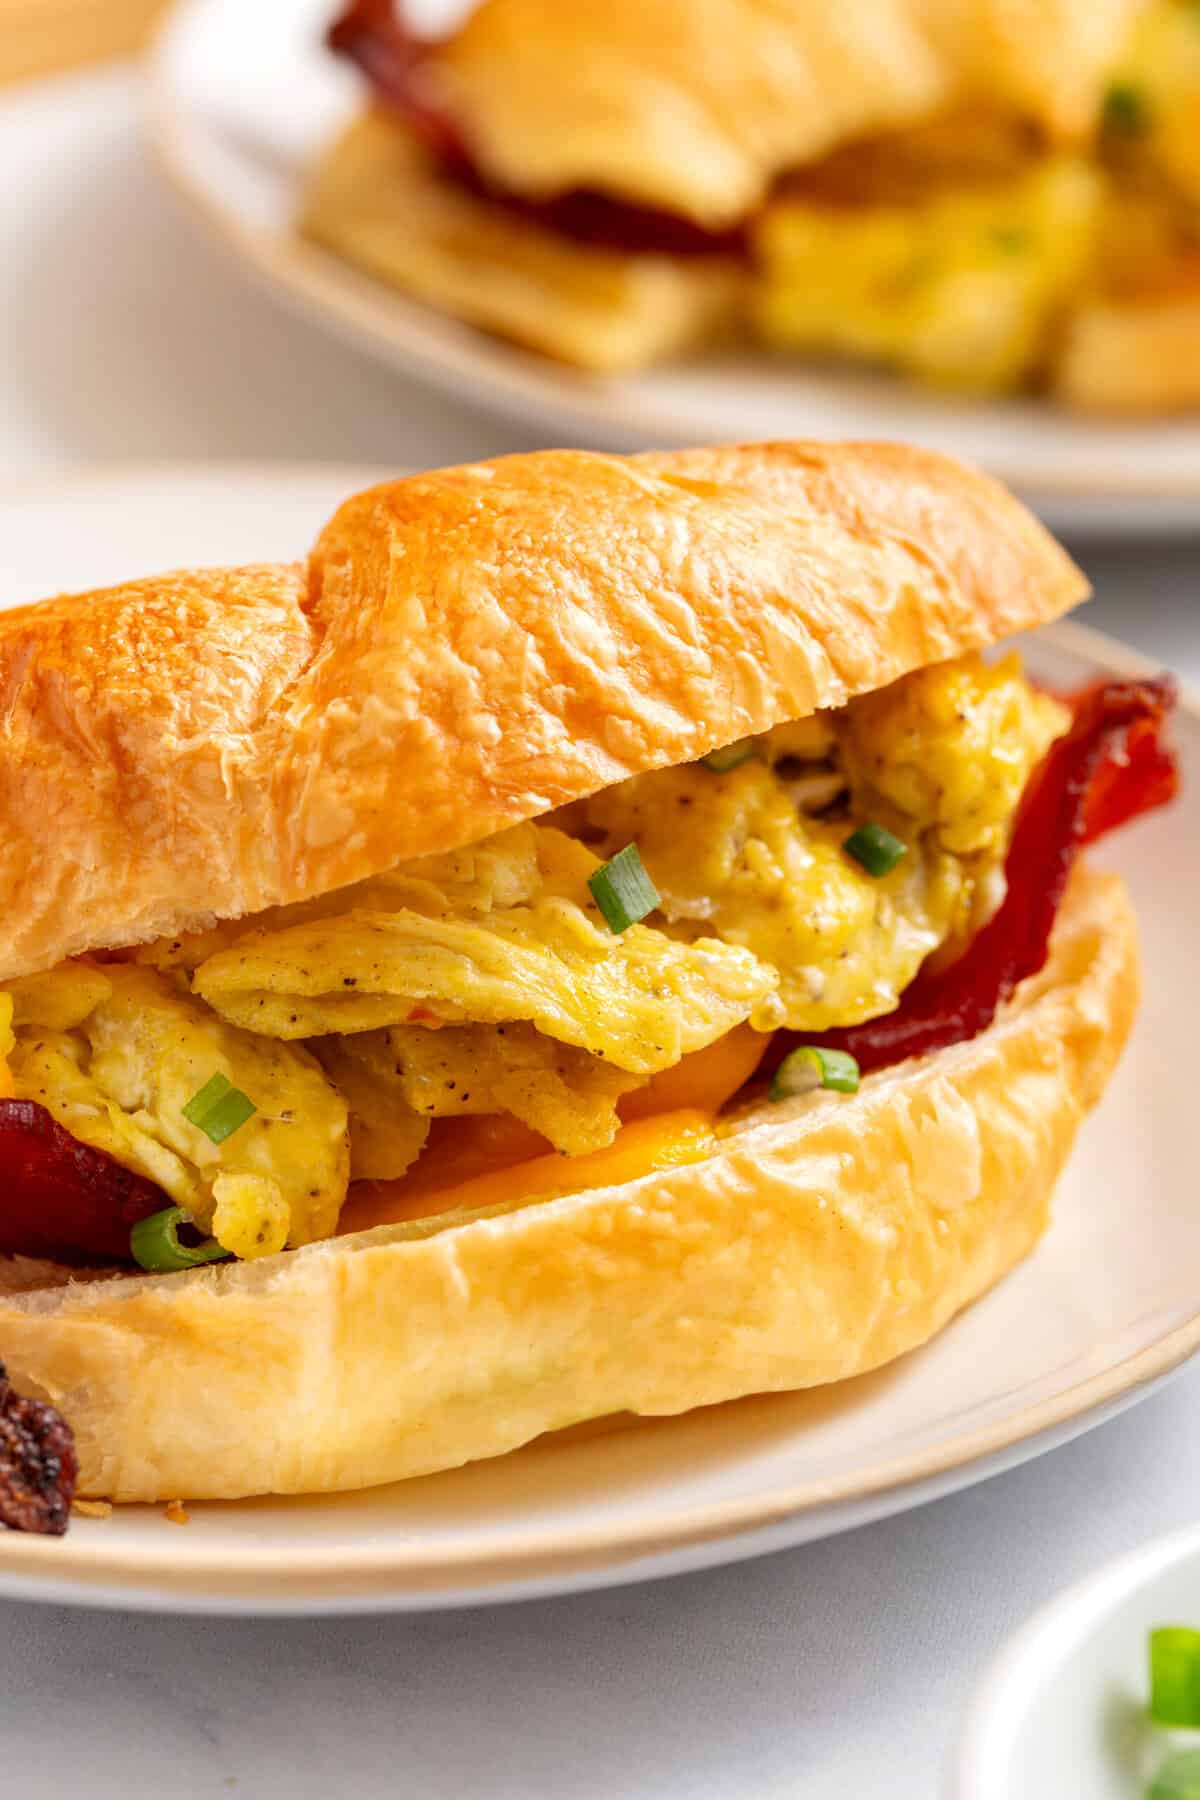 Close-up image of a croissant, breakfast sandwich served on a plate.